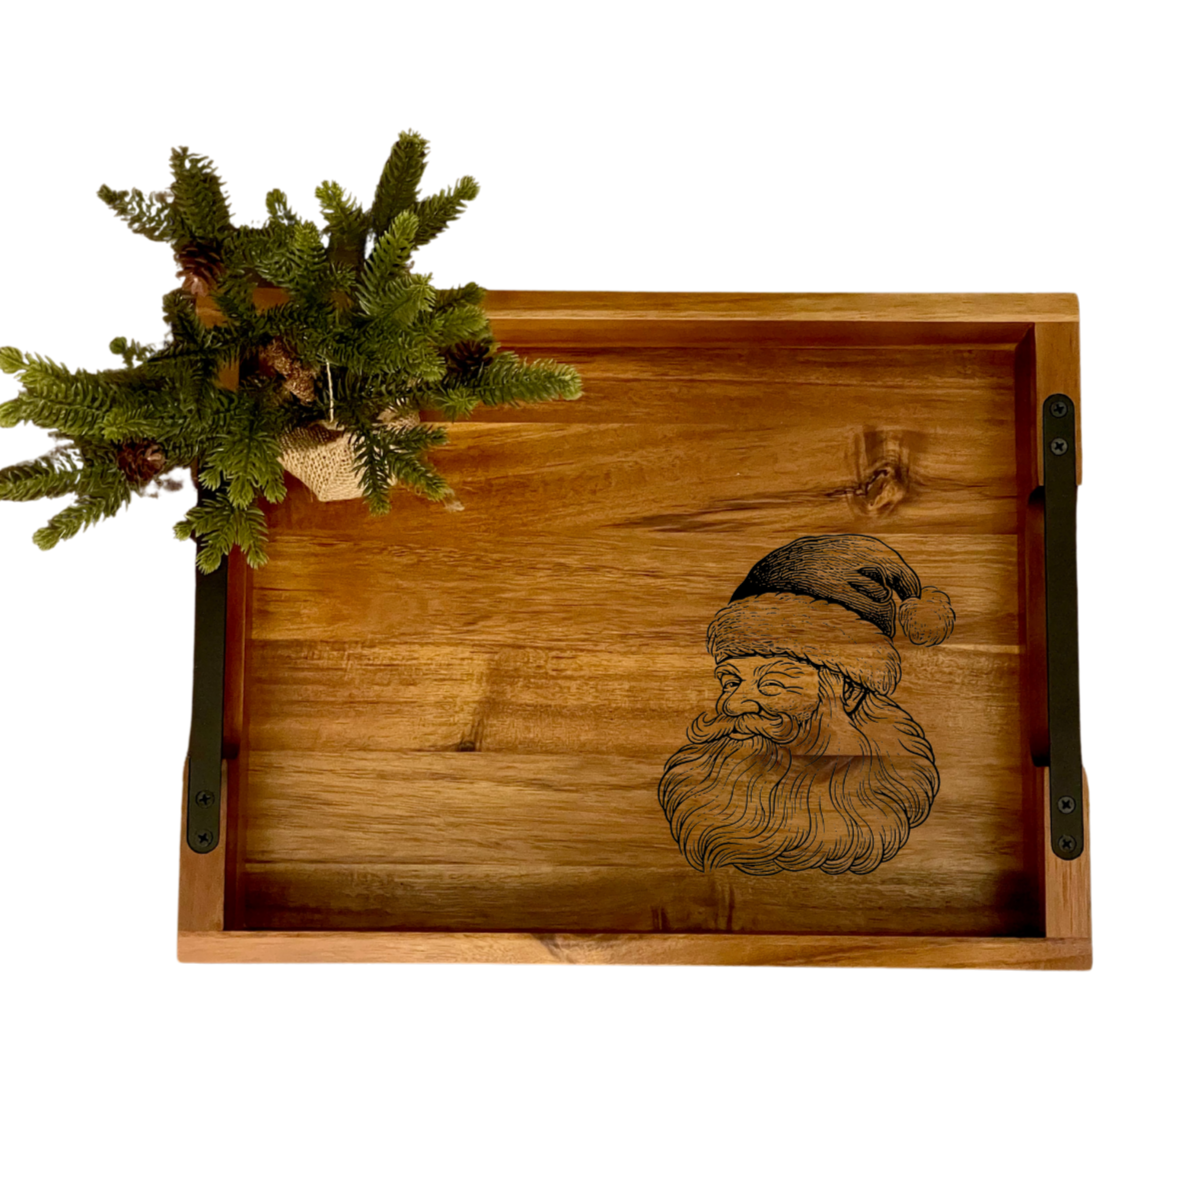 Christmas Serving Tray with Vintage Santa Engraved. Wood with metal Handles. Personalized.